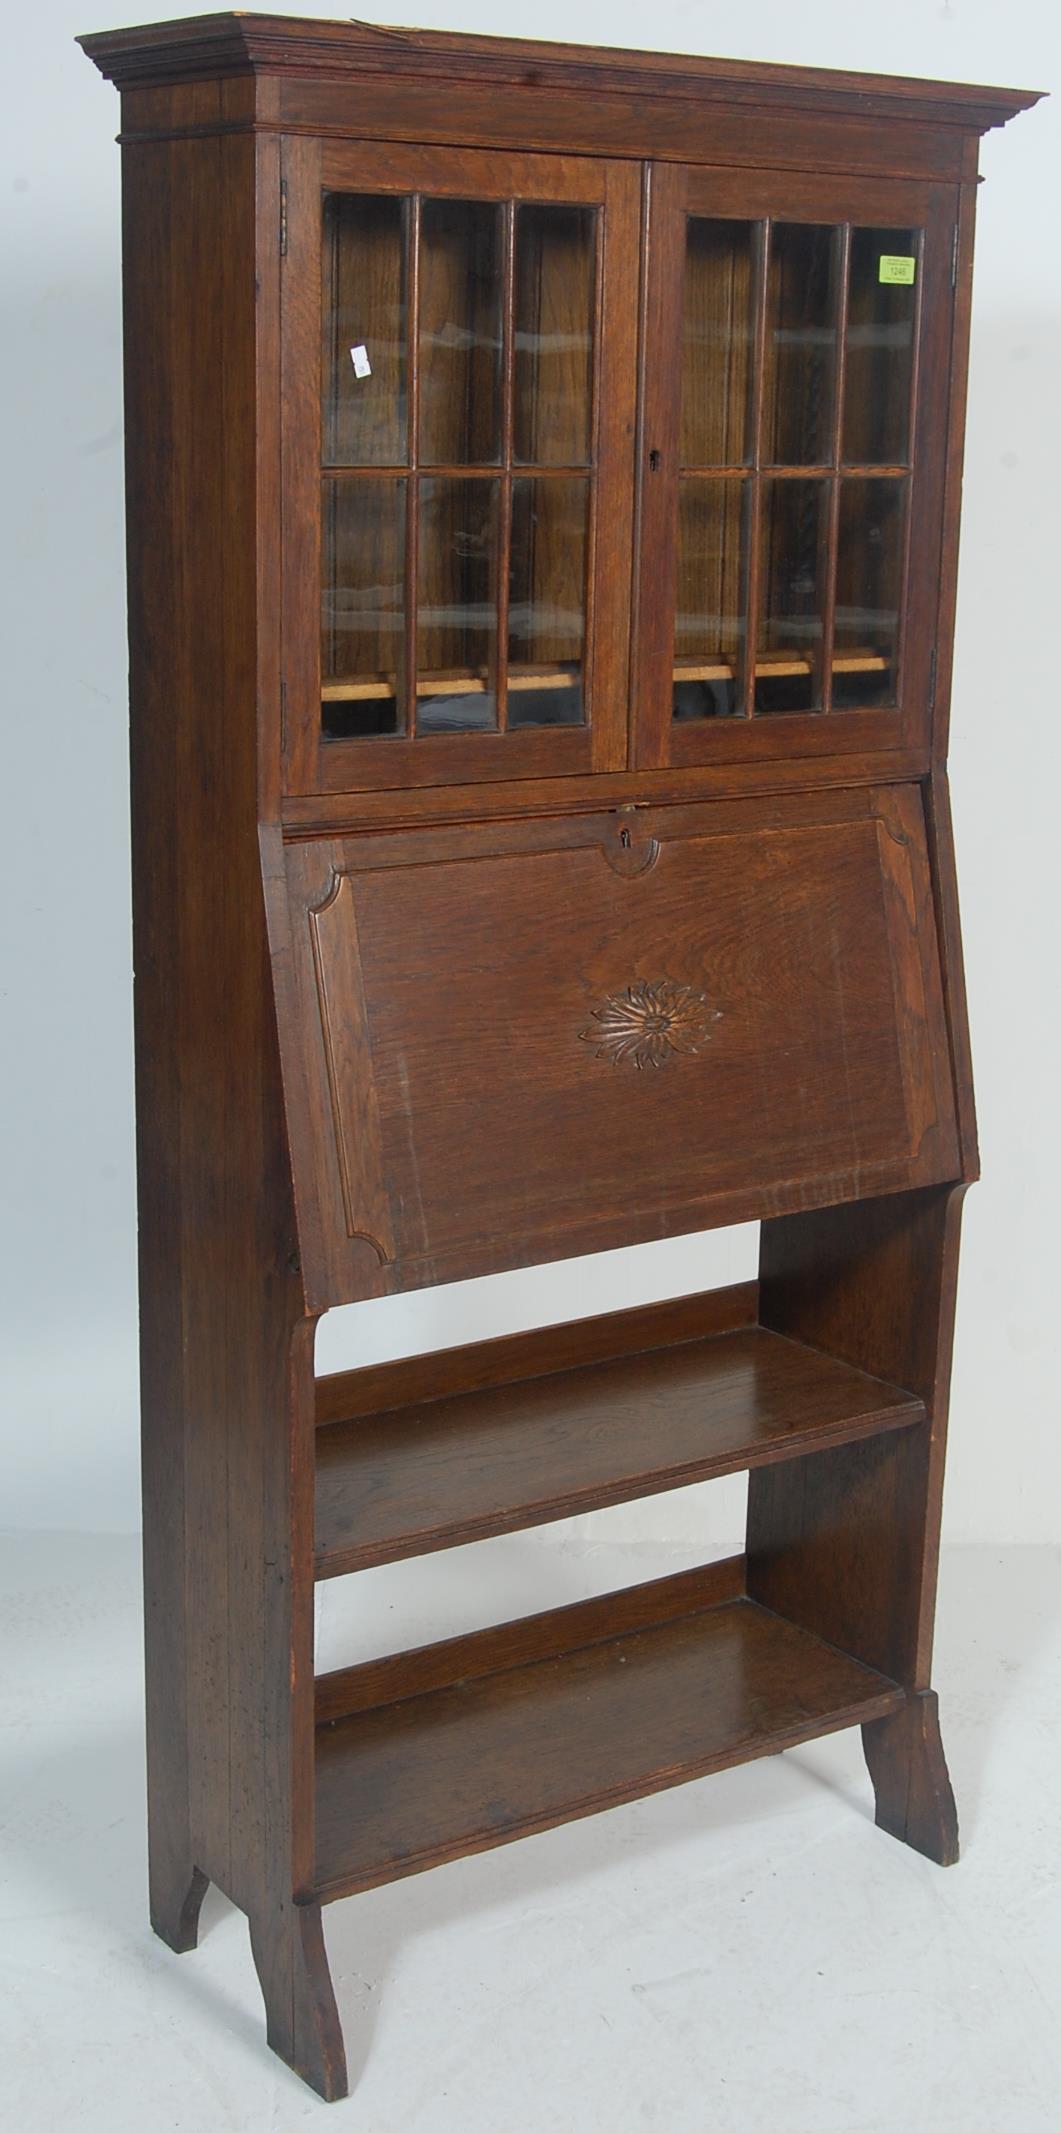 19TH CENTURY / EARLY 20TH CENTURY ARTS AND CRAFT LIBERTY STYLE BUREAU BOOKCASE.